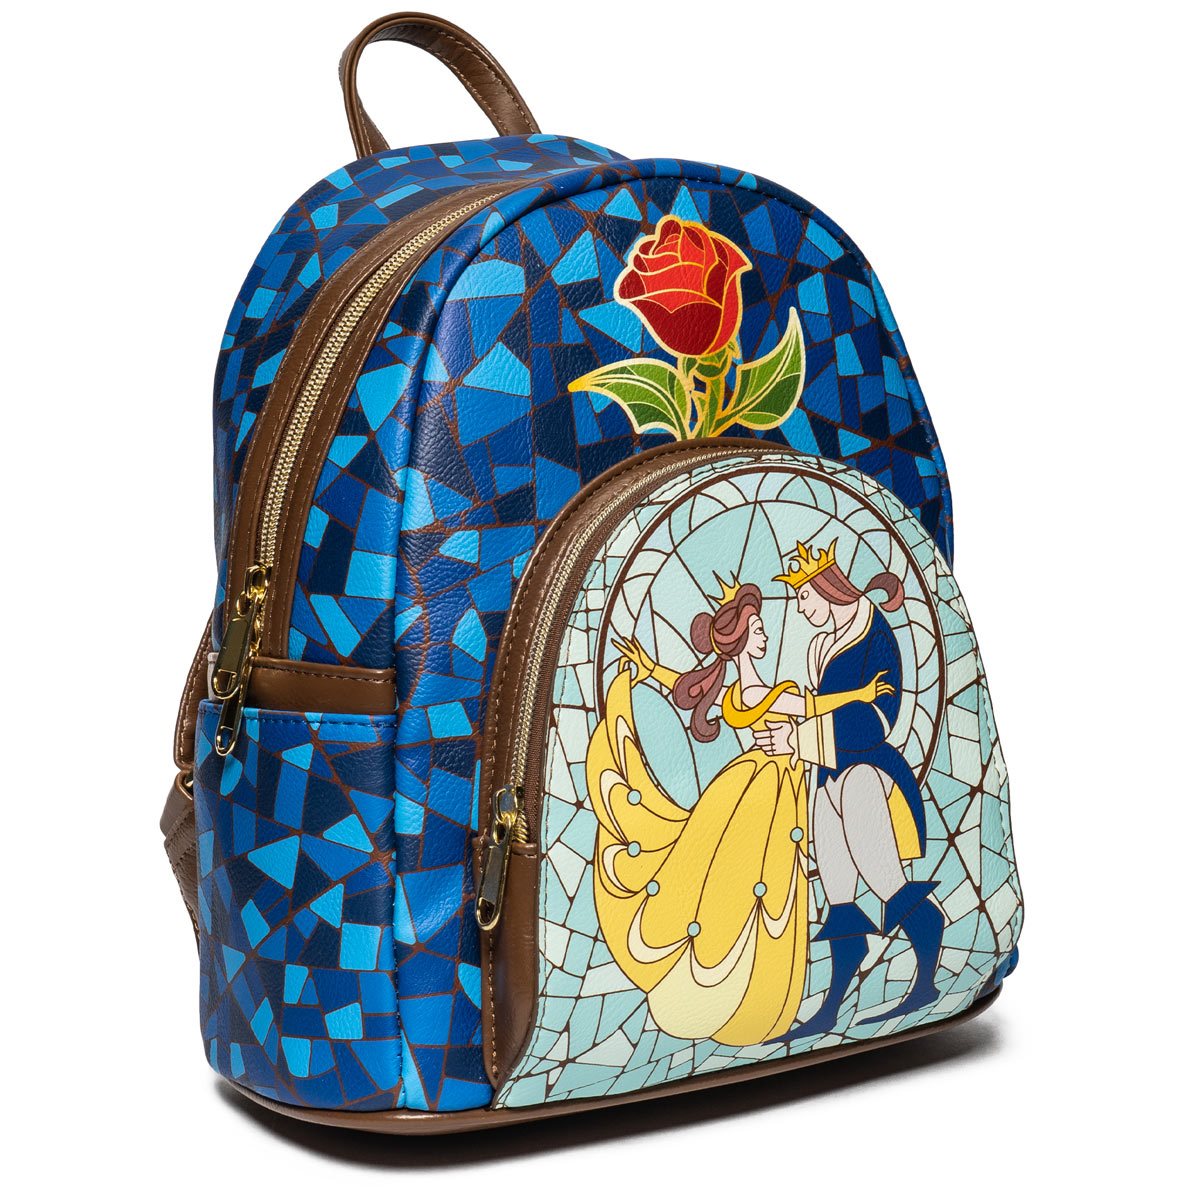 REALIZE: Limited Edition Backpack – Fleazy Art